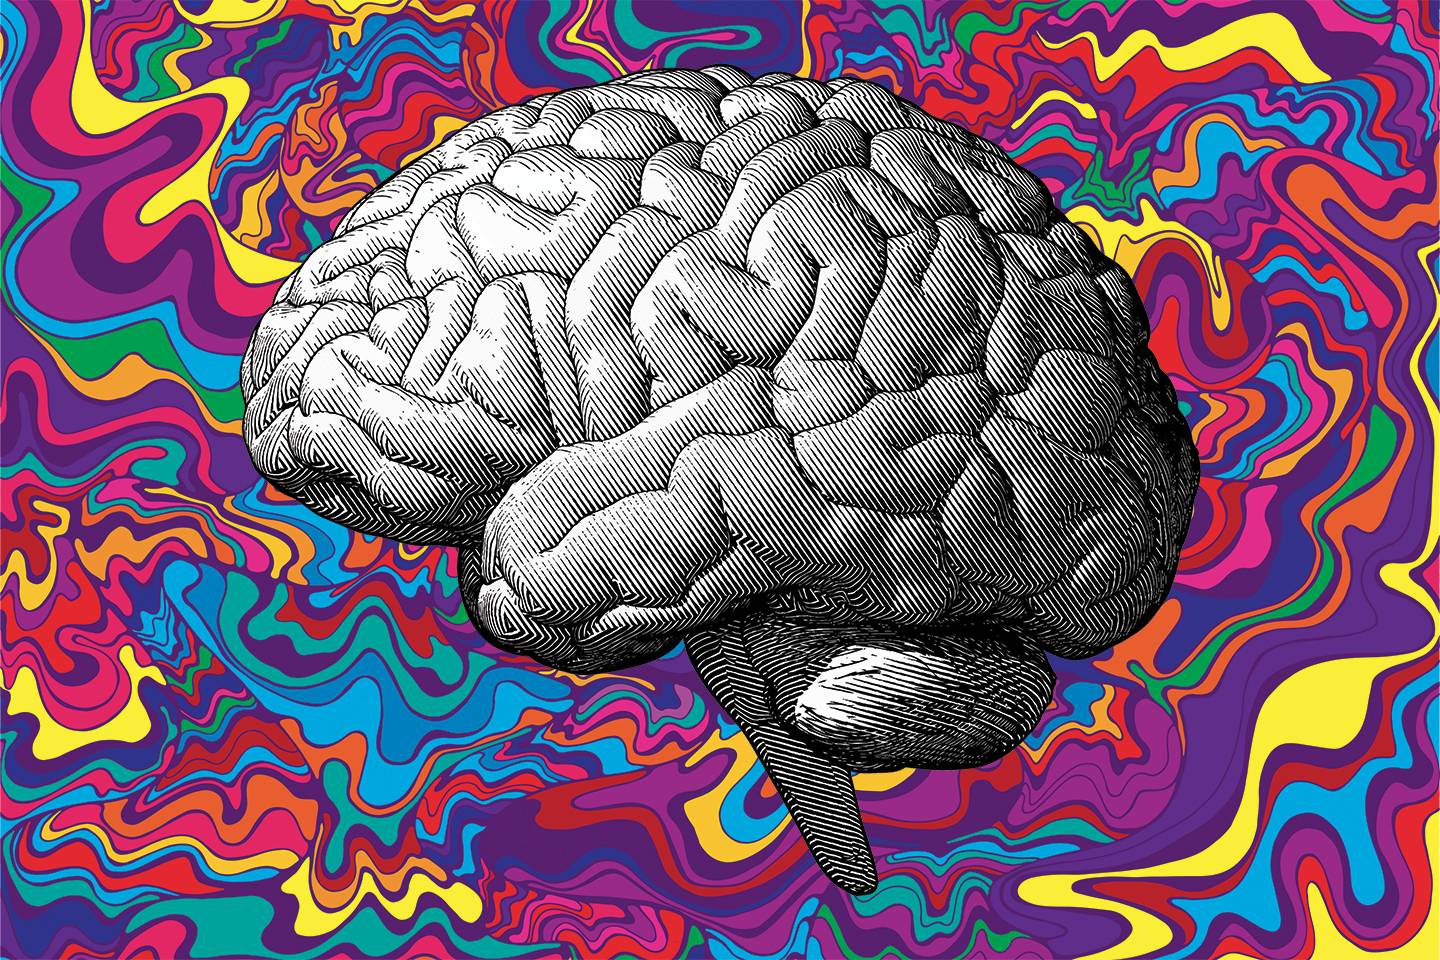 The Future of Psychedelics in Psychotherapy (Turtles all the Way Down)